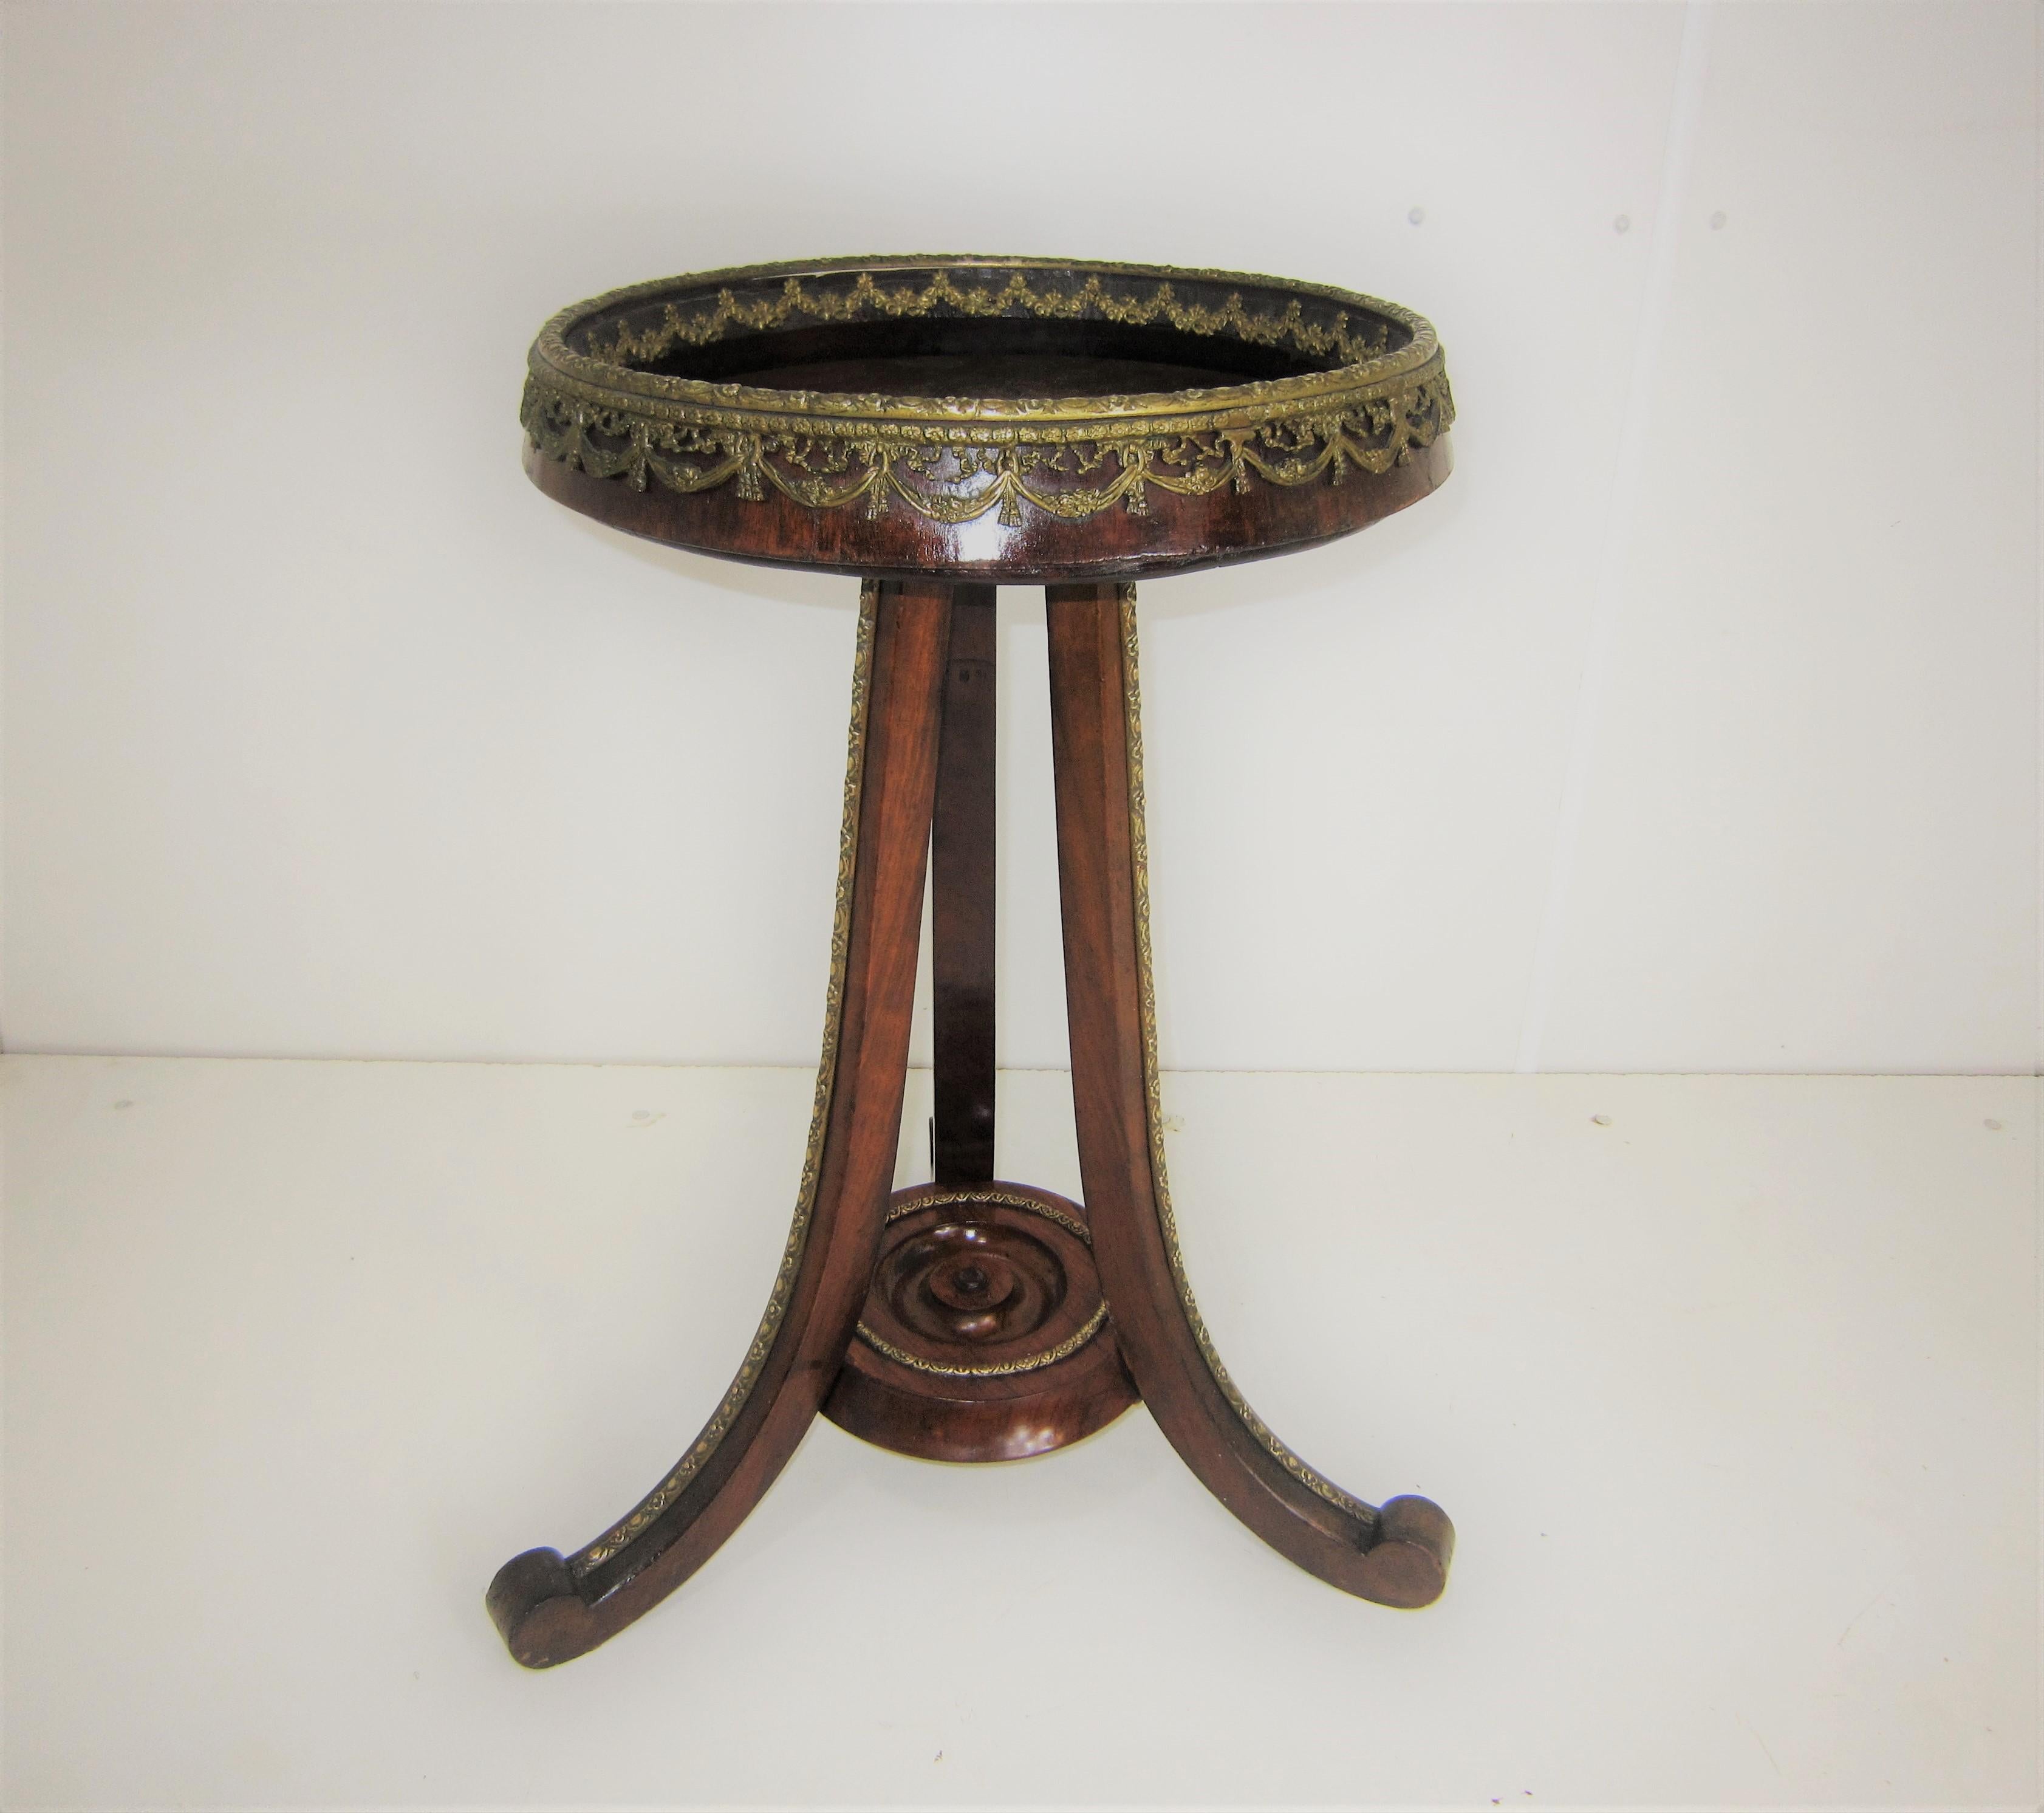 Antique walnut and fruitwood pedestal table with circular top featuring a gallery surround of foliate swag and floral motif ending in tripodal splay leg base. The bronze border is festooned on the inner as well as the outer top rim which gives the